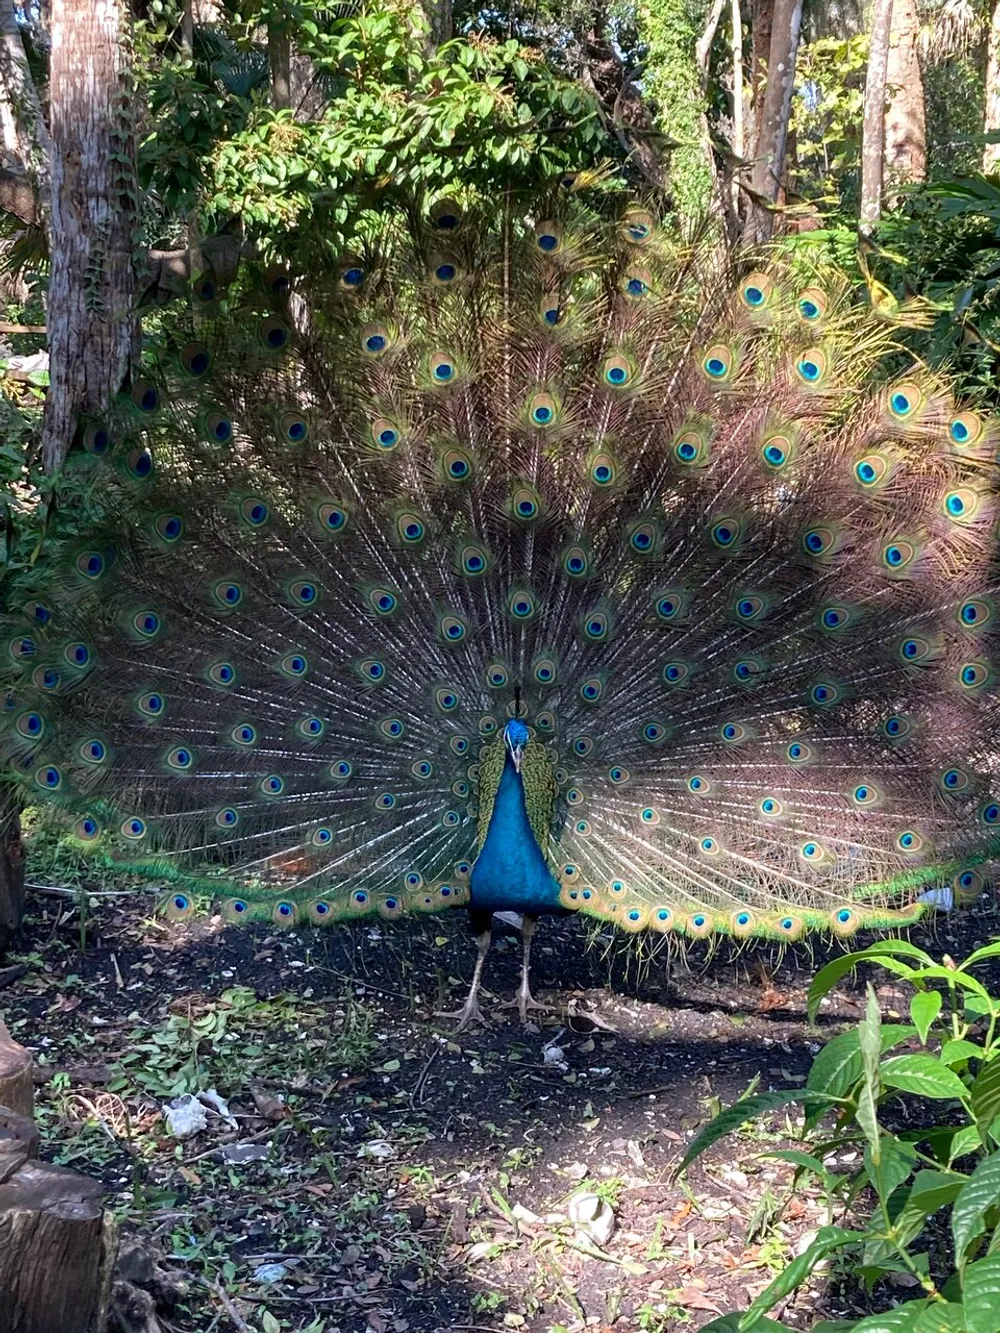 A peacock is displaying its splendid tail feathers characterized by vivid blue and green colors and distinctive eye patterns in a natural forest setting